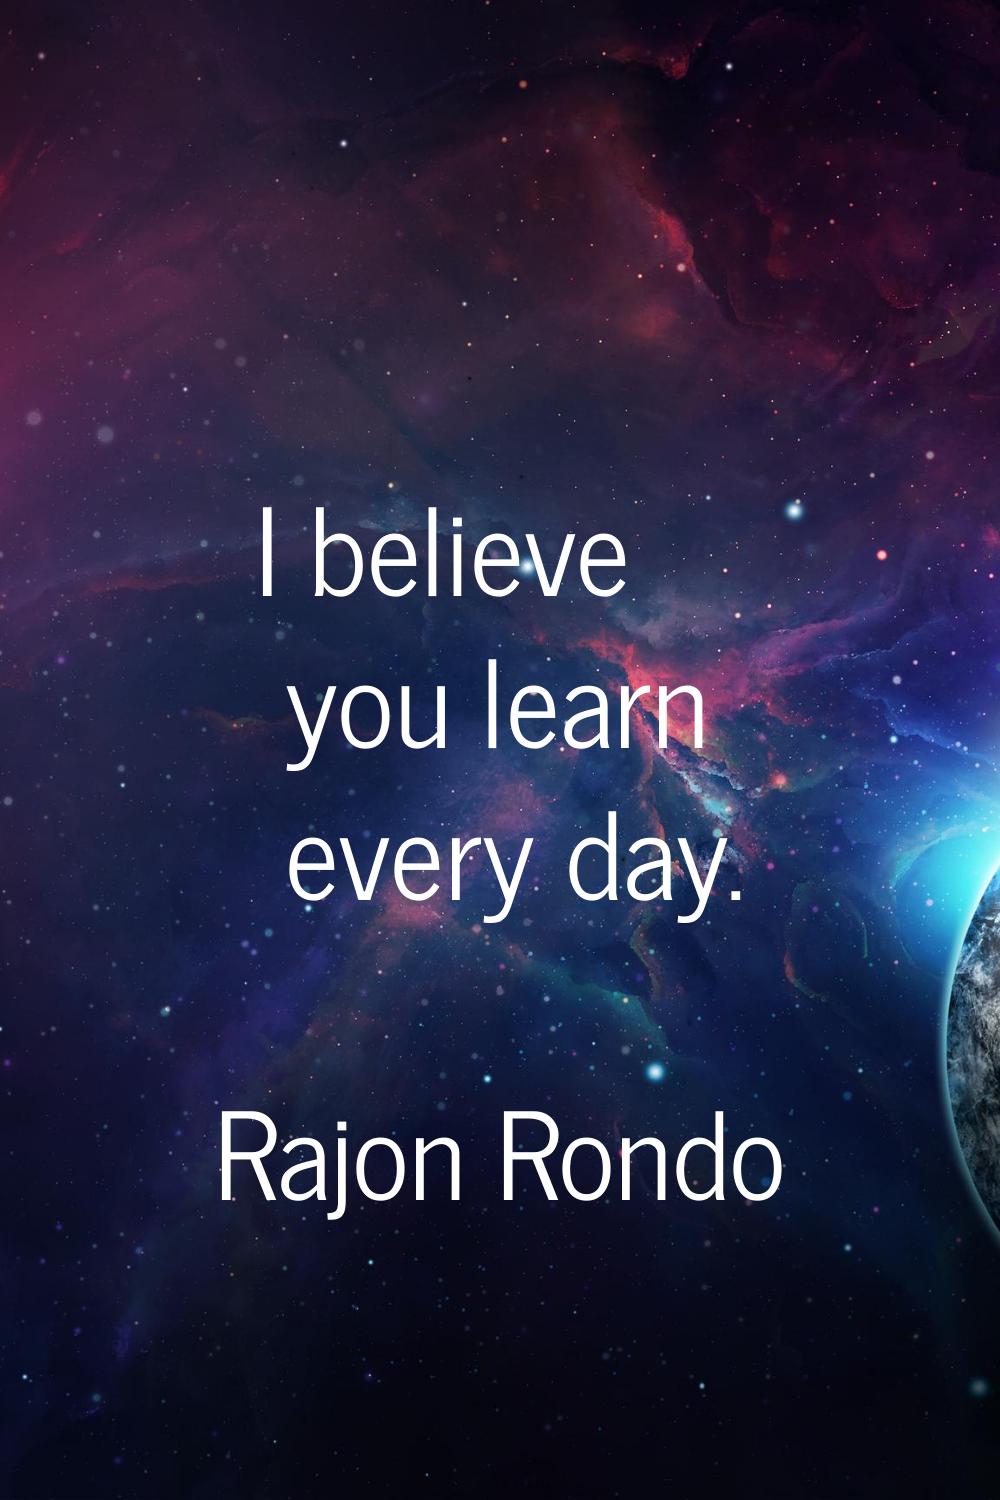 I believe you learn every day.